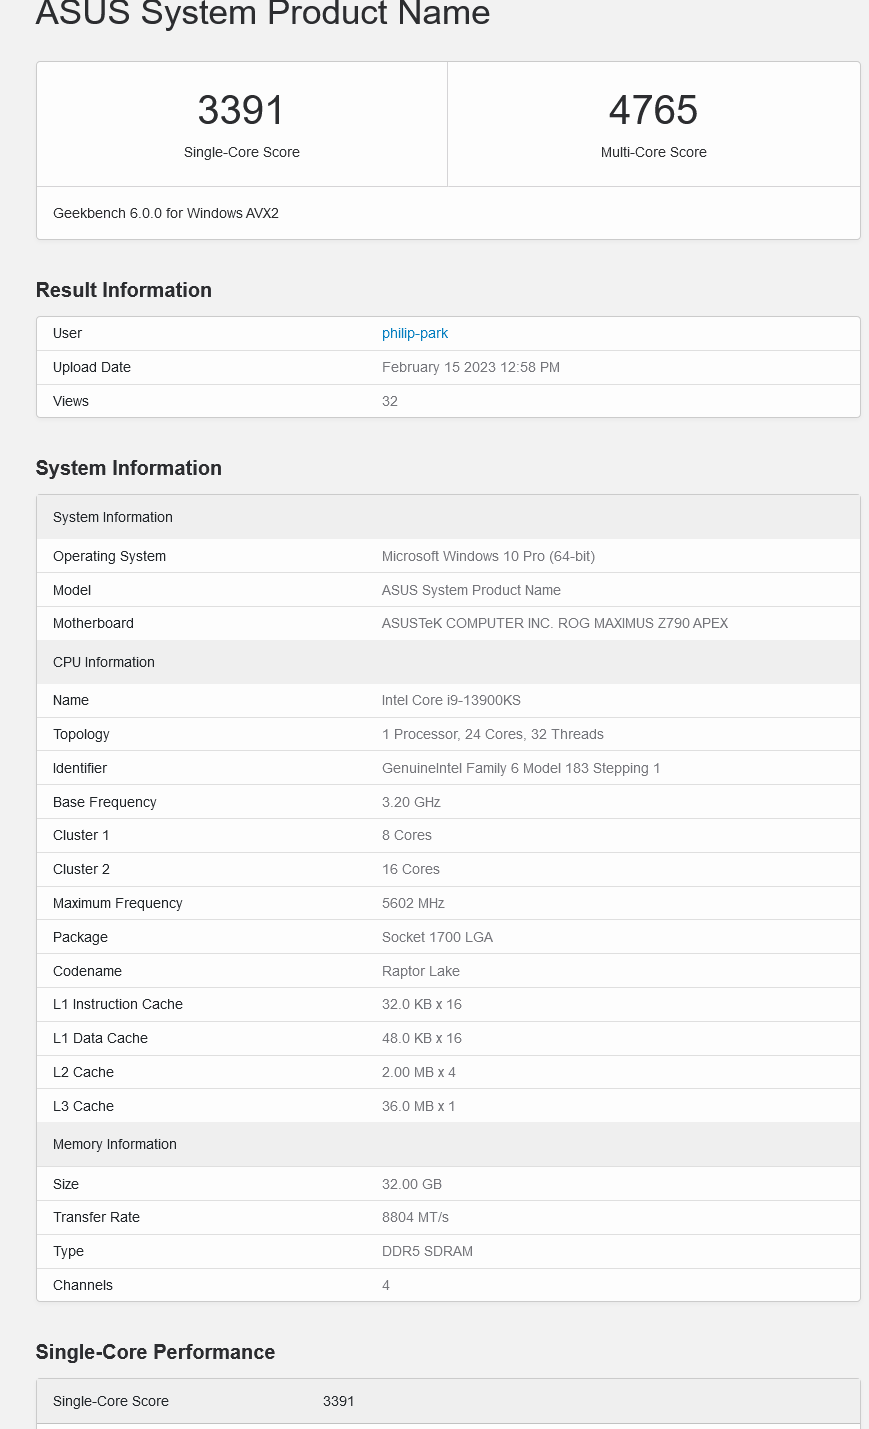 Screenshot 2023-02-16 at 18-09-14 ASUS System Product Name - Geekbench Browser.png